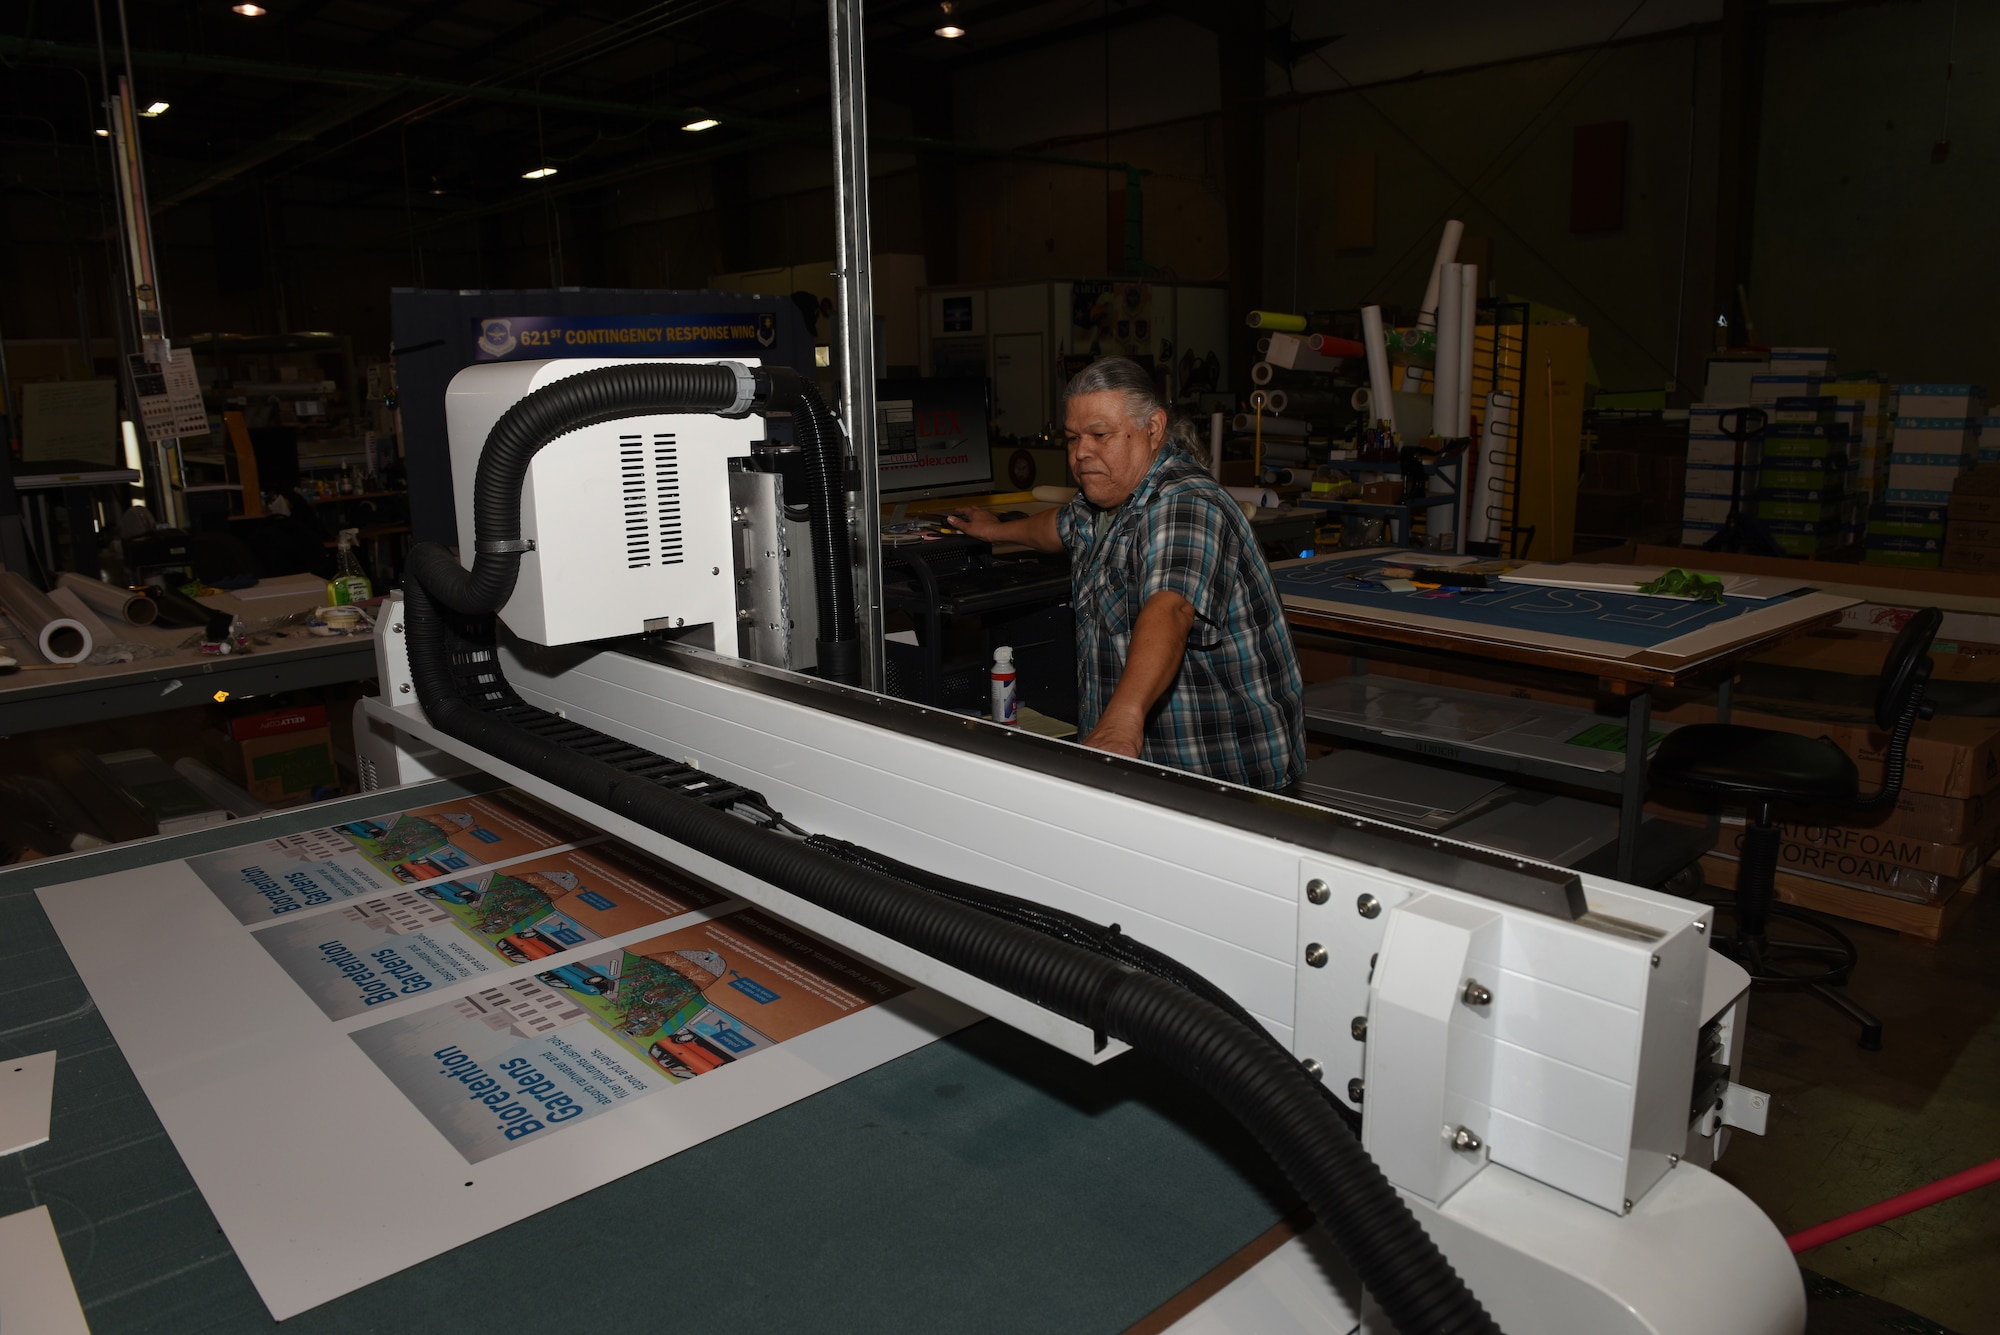 Carlos Castro, Defense Logistics Agency, prepares to cut out several posters Feb. 7, 2019, at Travis Air Force Base, Calif. The Travis DLA facility provides a variety of printing services to federal agencies and government offices. (U.S. Air Force photo by Tech. Sgt. James Hodgman)